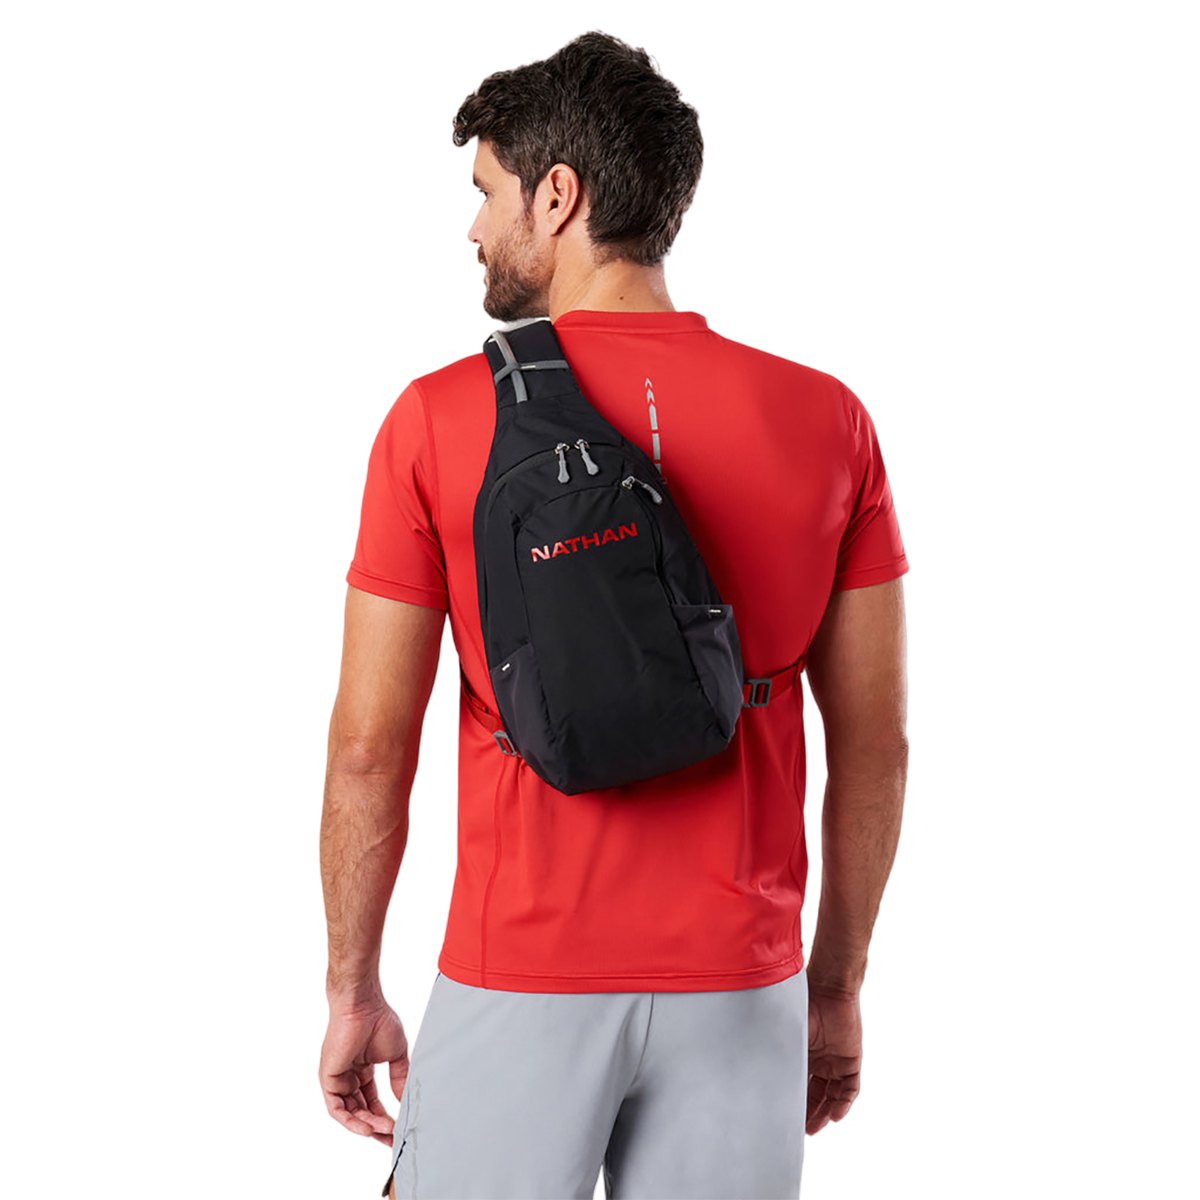 Nathan Run Sling 8L, , large image number null